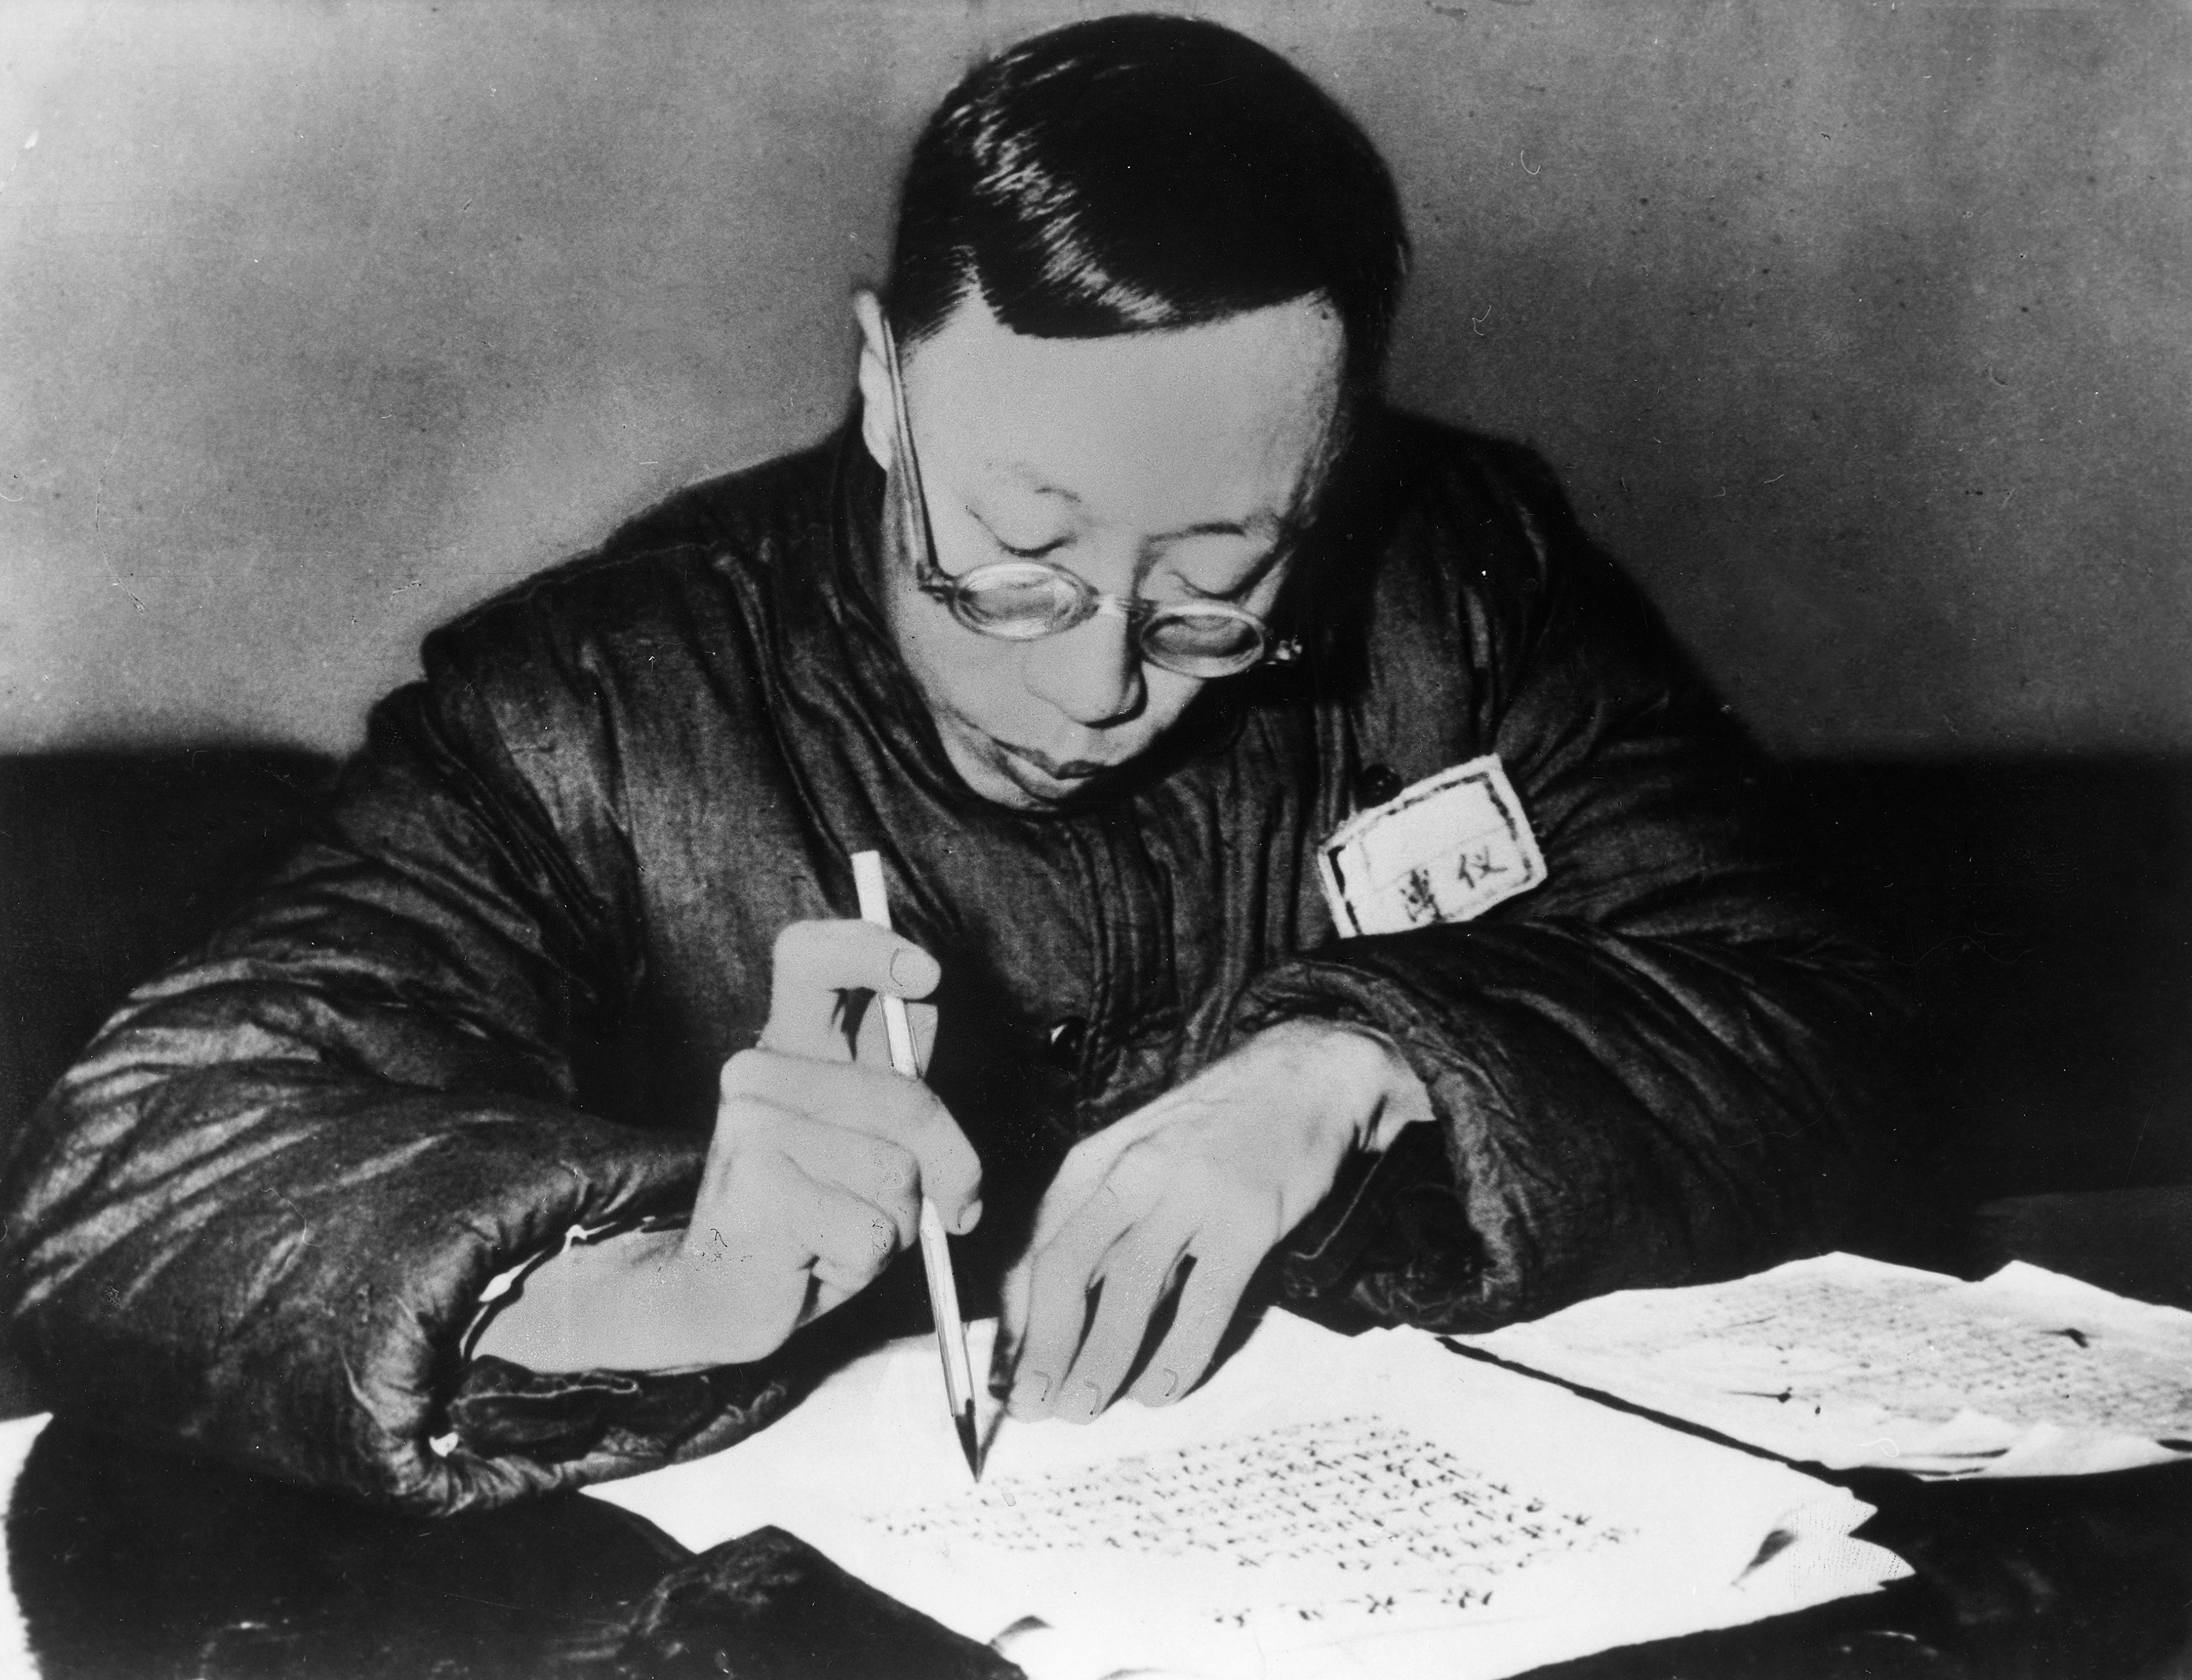 The recent coup attempt in Germany recalls China’s last emperor, Aisin-Gioro Puyi (above), who was reinstated in a brief coup in 1917, and named “Emperor of Manchukuo” following Japan’s invasion of northeast China in the 1930s. Photo: Getty Images